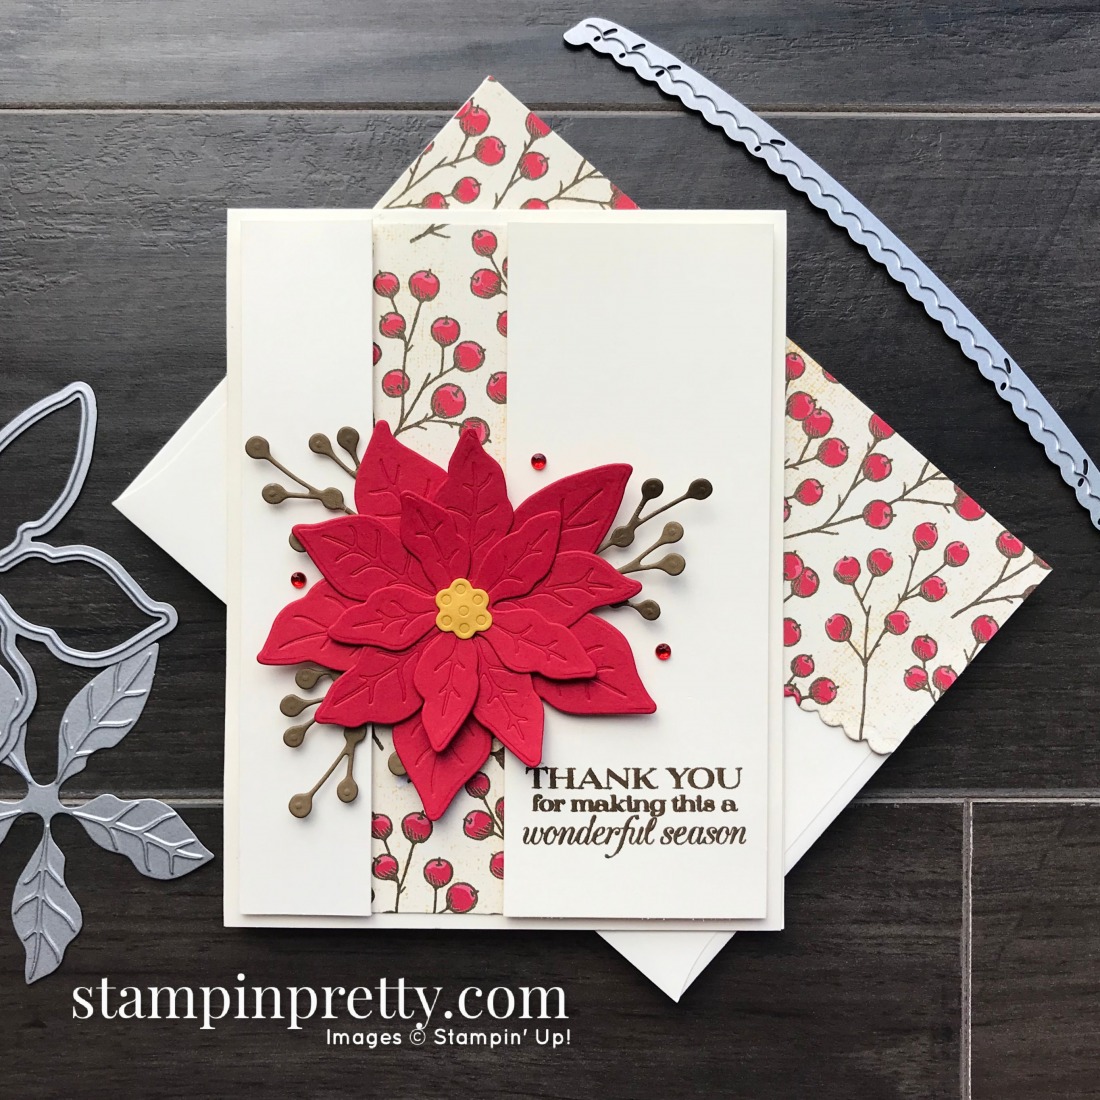 Create this holiday card using the Poinsettia Place Suite from Stampin' Up! Card by Mary Fish, Stampin' Pretty!